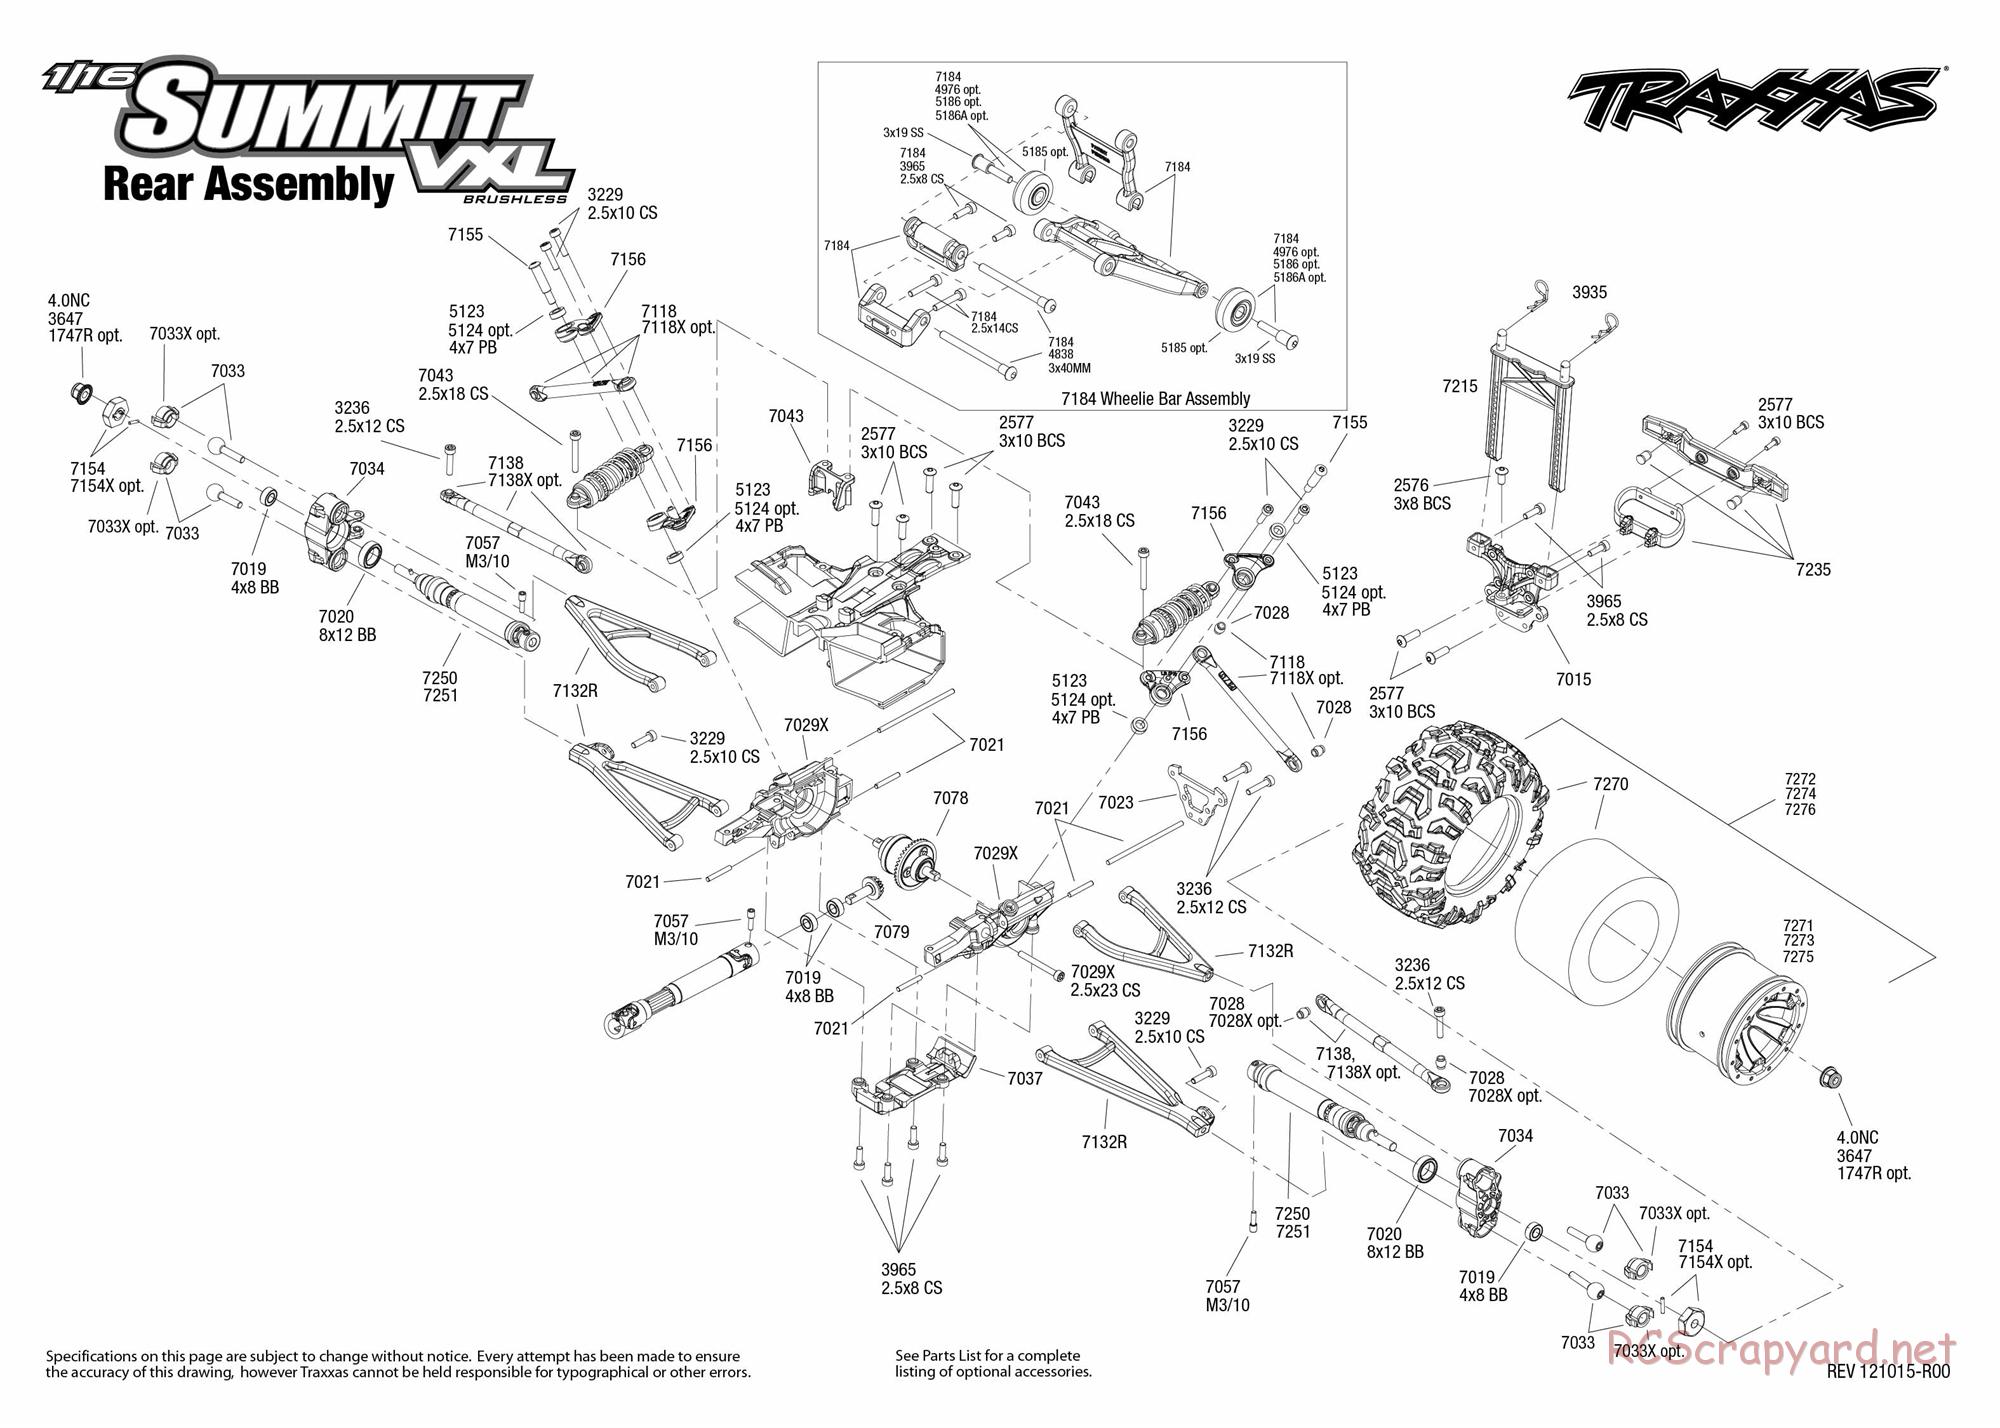 Traxxas - 1/16 Summit VXL (2012) - Exploded Views - Page 4